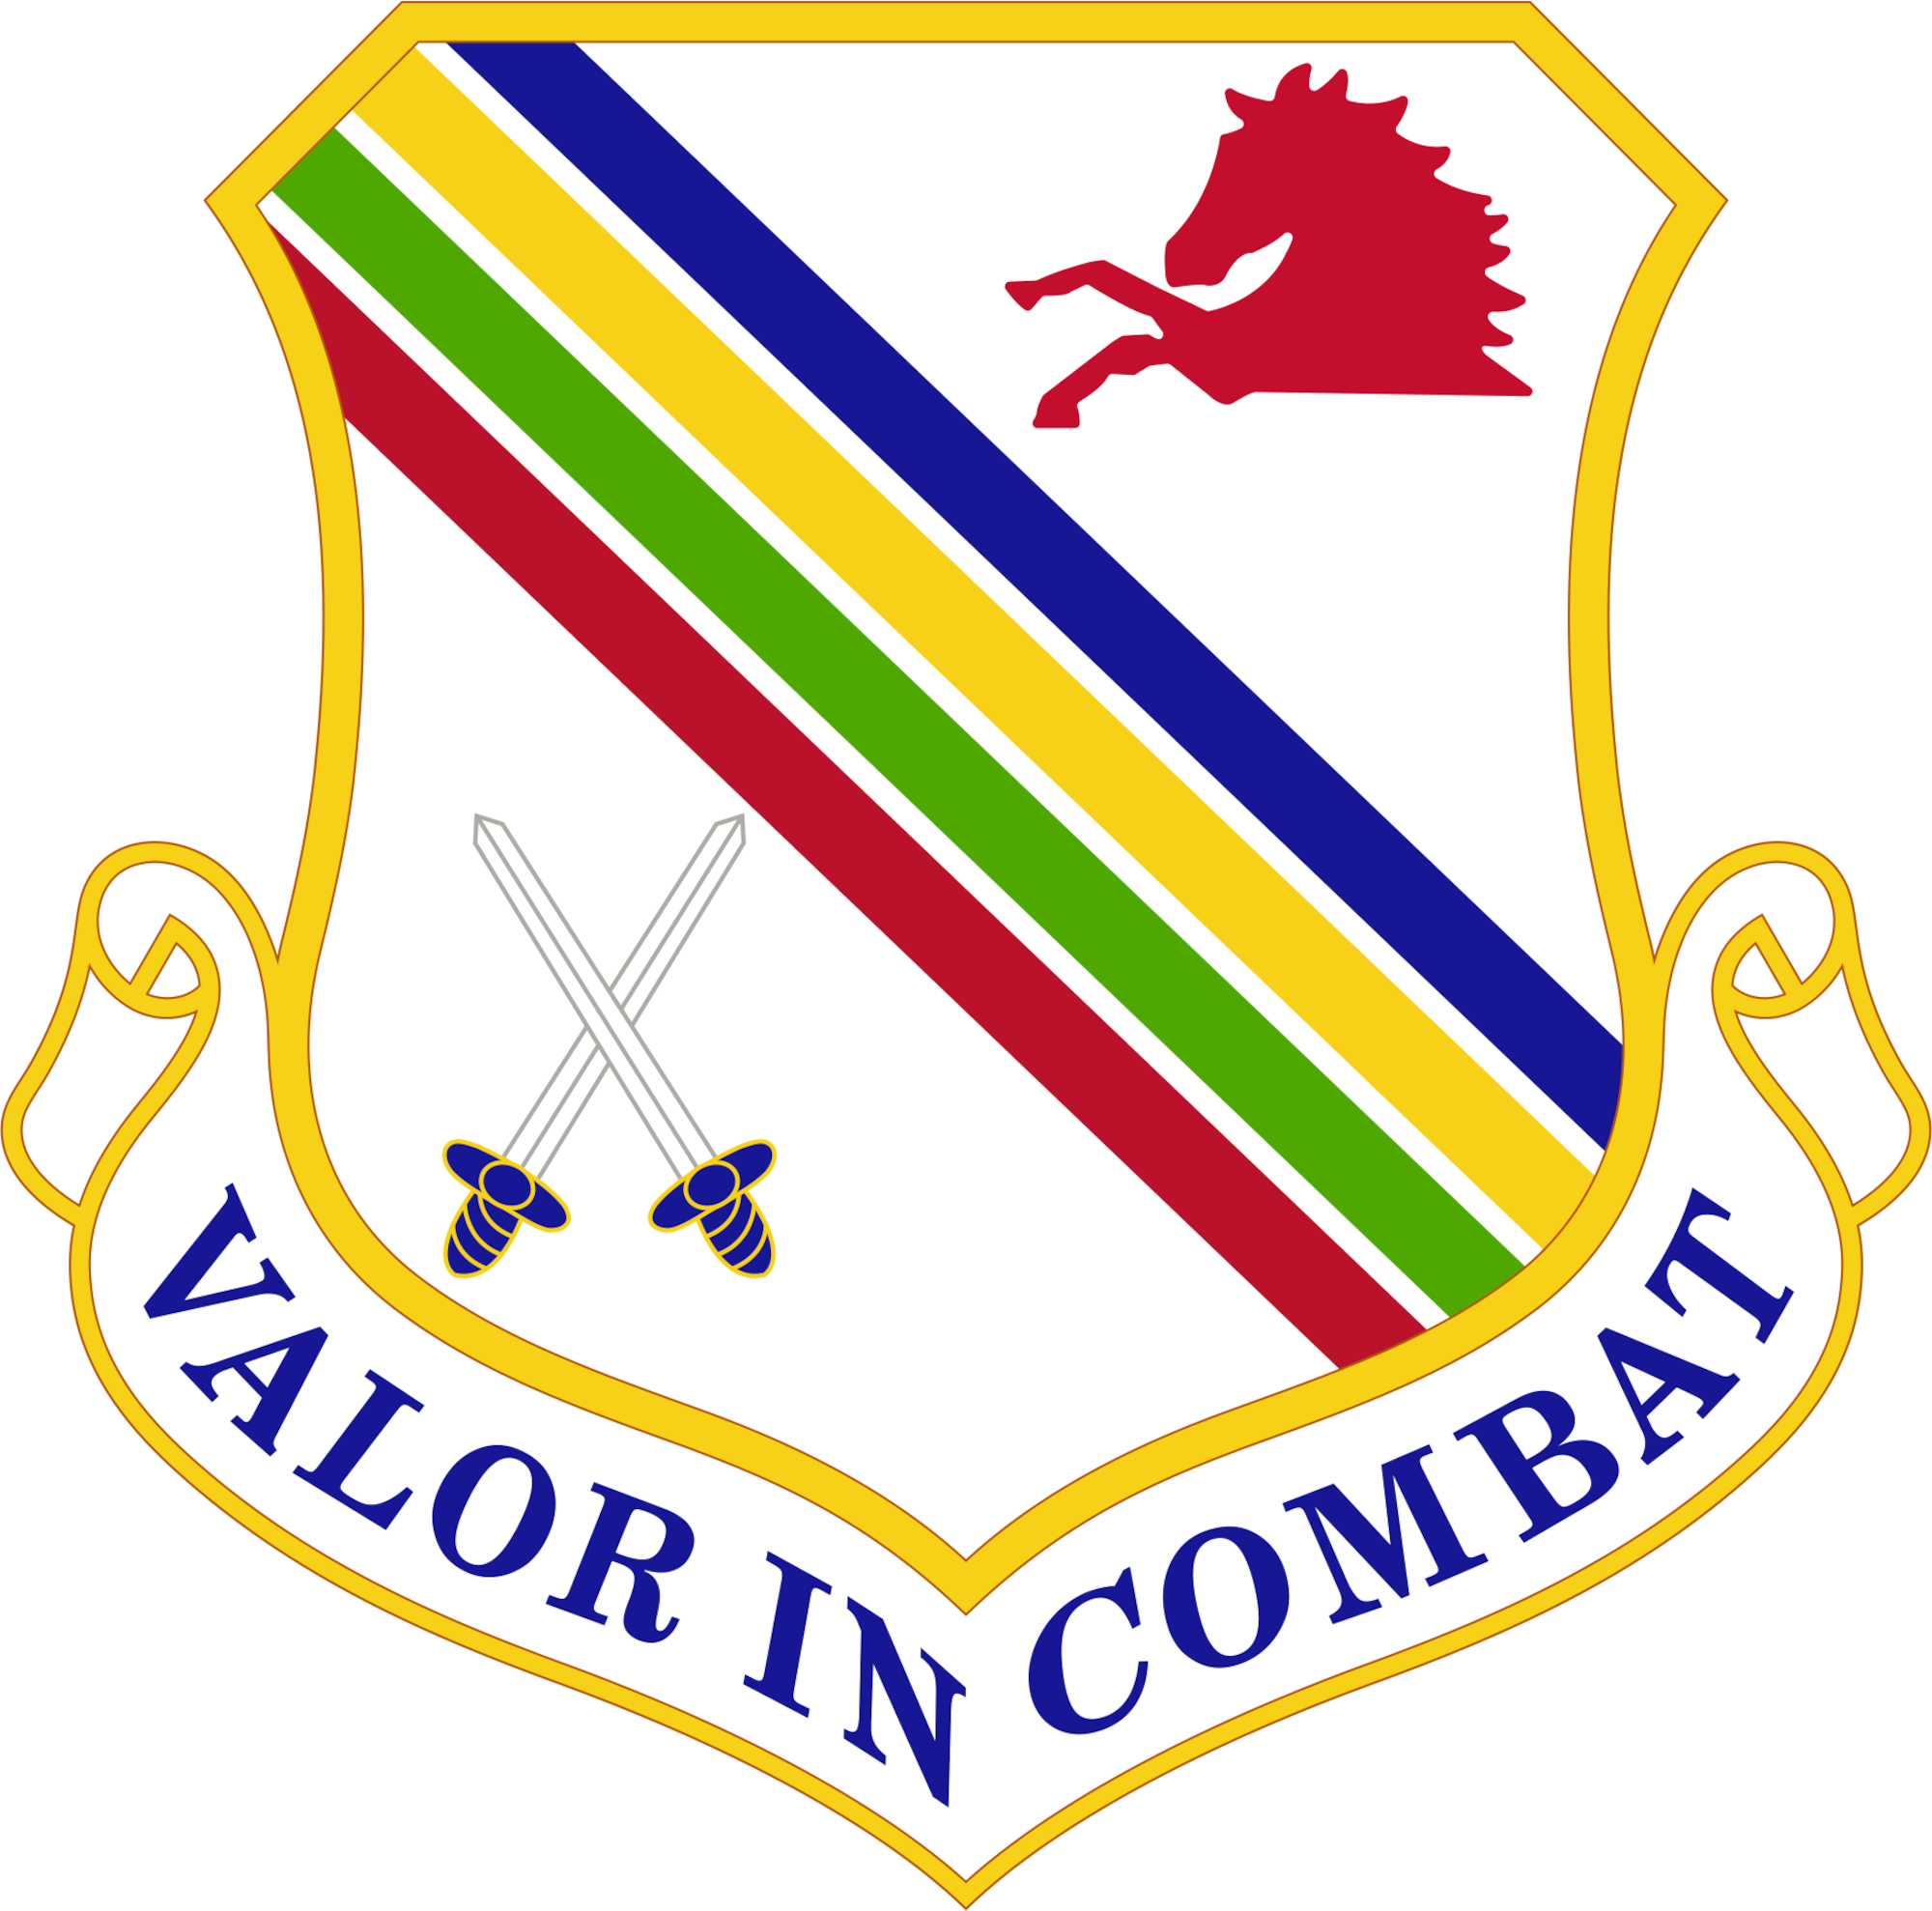 The 354th Fighter Wing Shield